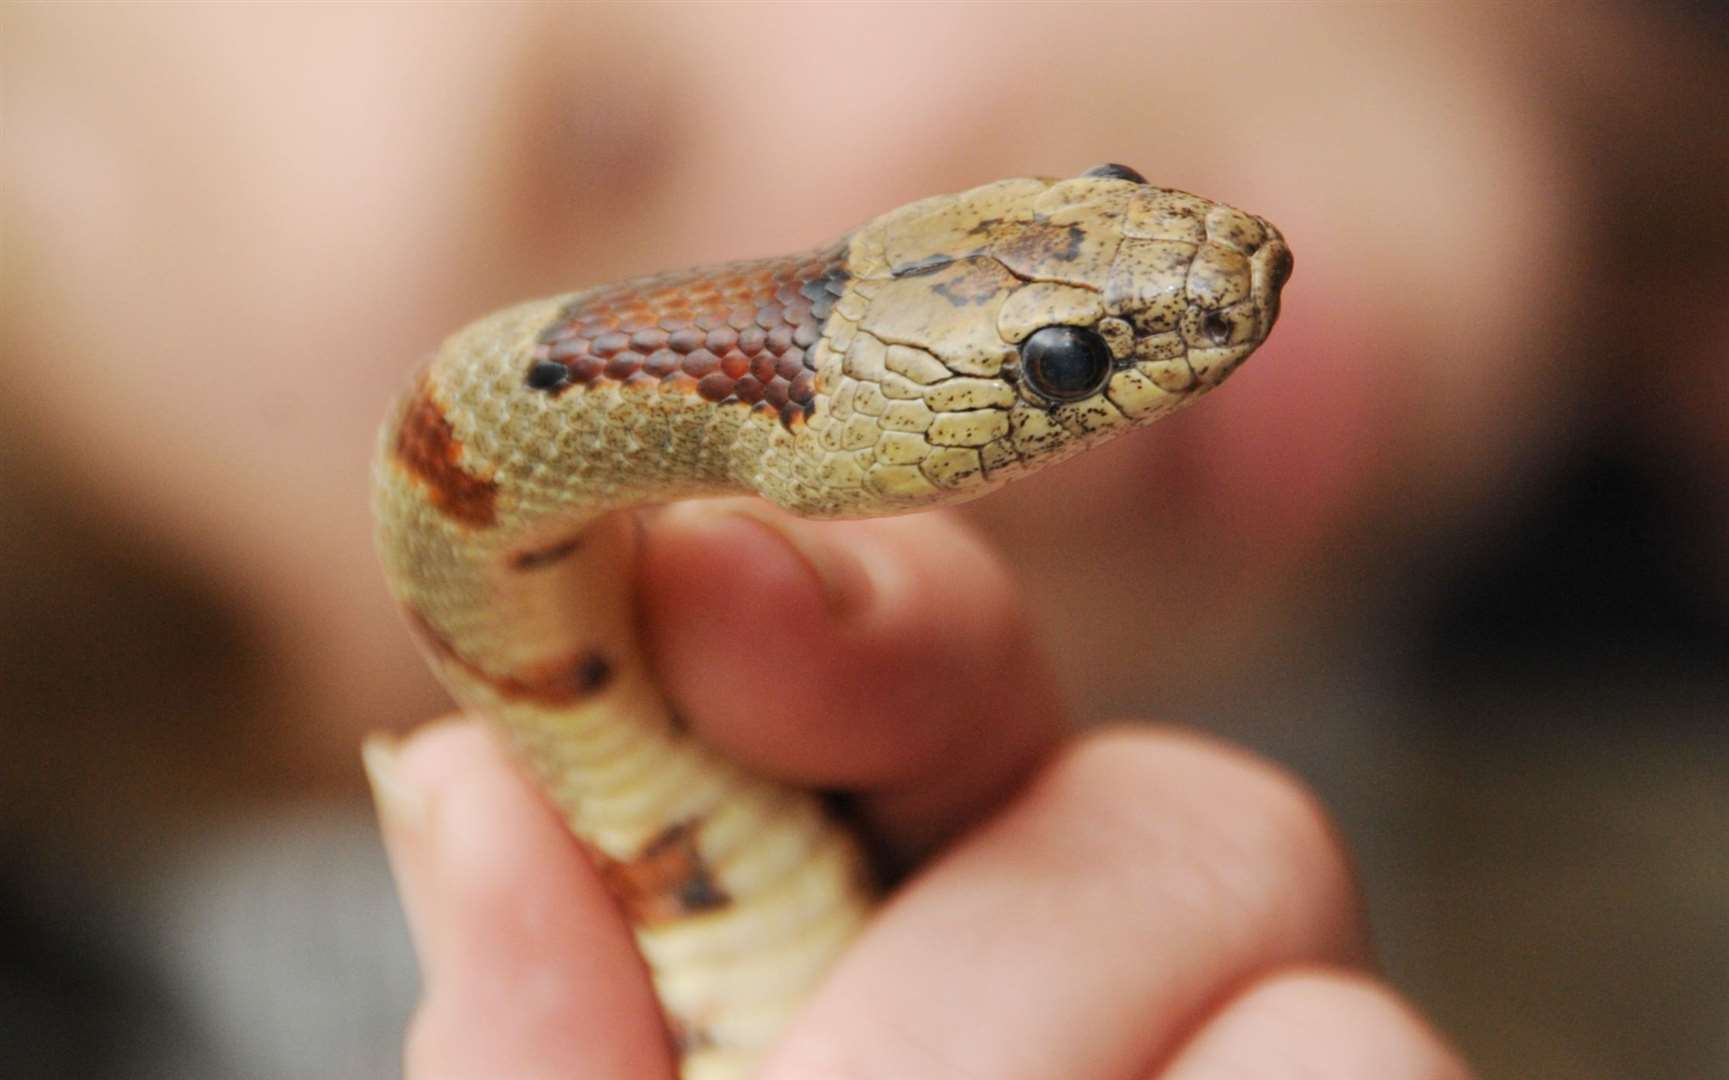 The RSPCA is warning owners or pet snakes to ensure their enclosures are secure